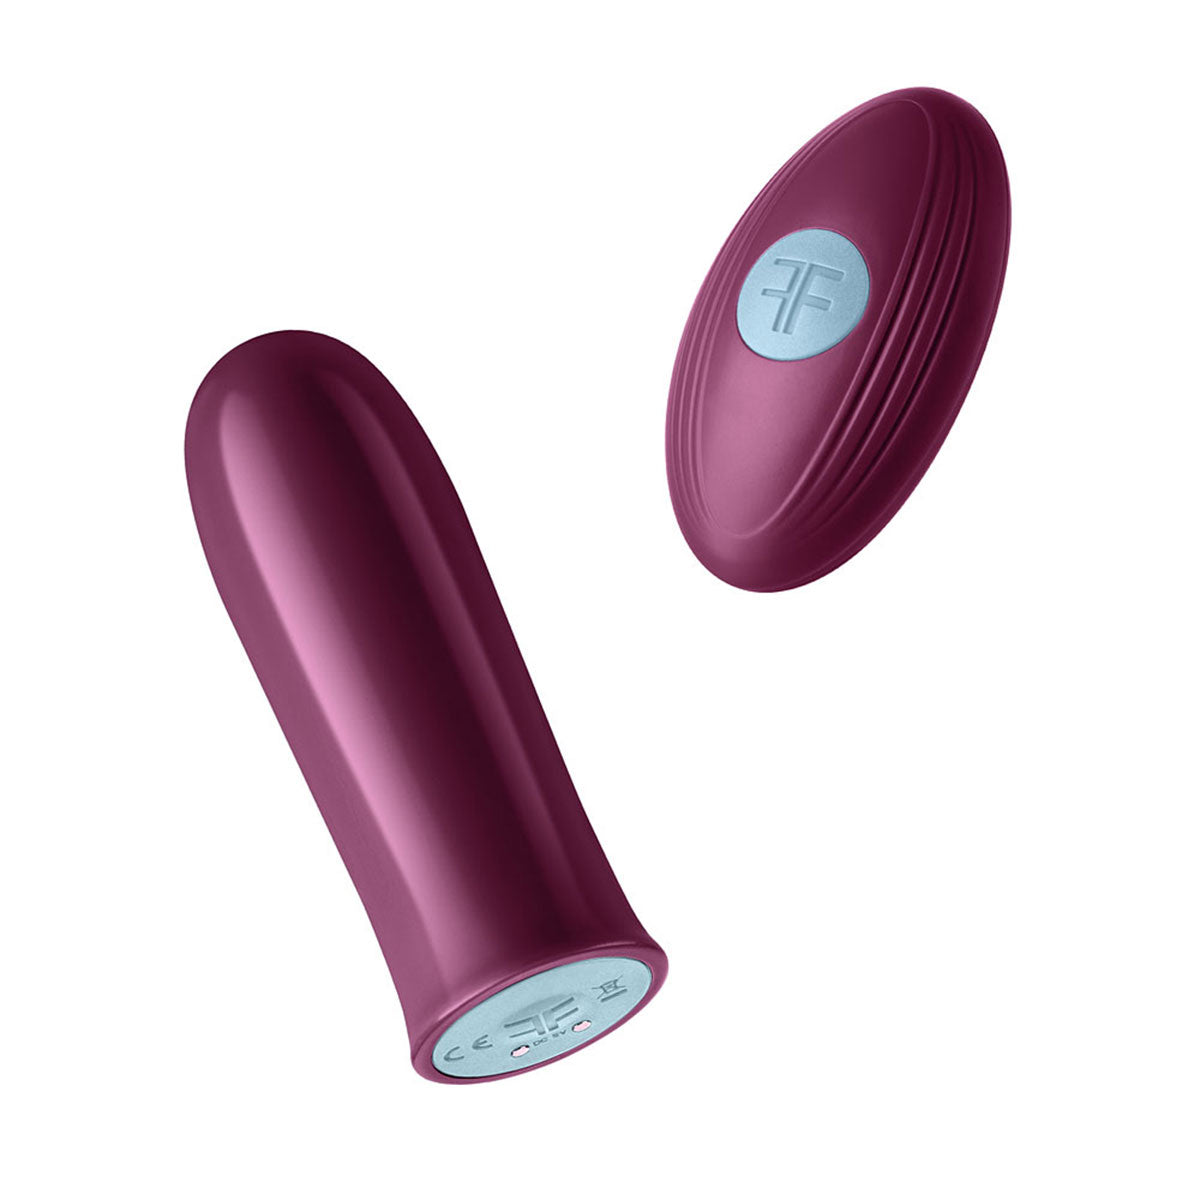 Femme Funn Versa Bullet and Remote - Assorted Colors